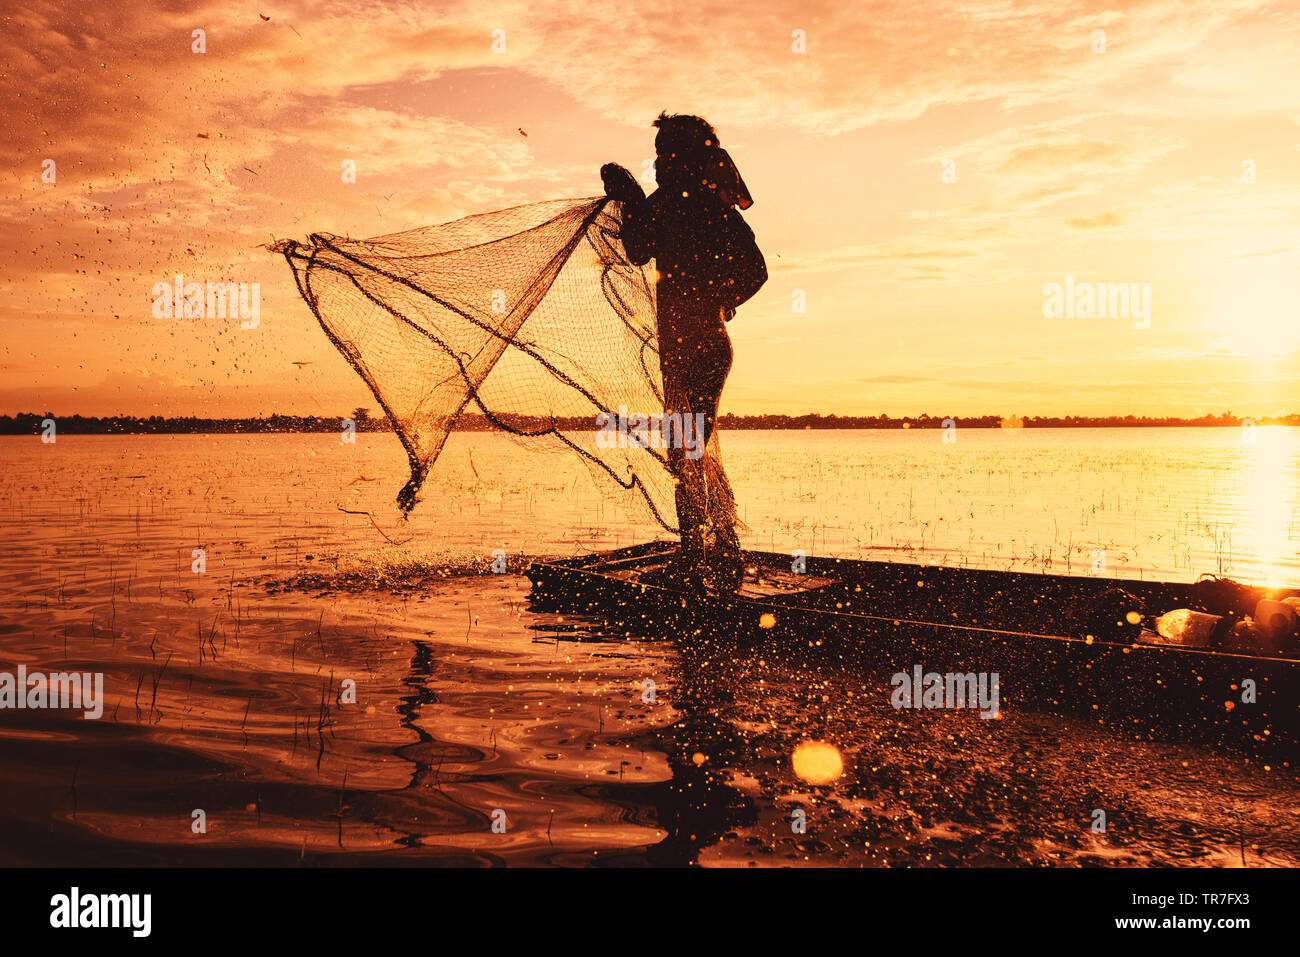 https://c8.alamy.com/comp/TR7FX3/asia-fisherman-using-net-fishing-on-wooden-boat-casting-net-sunset-or-sunrise-in-the-river-silhouette-fisherman-stand-on-boat-life-person-at-country-TR7FX3.jpg